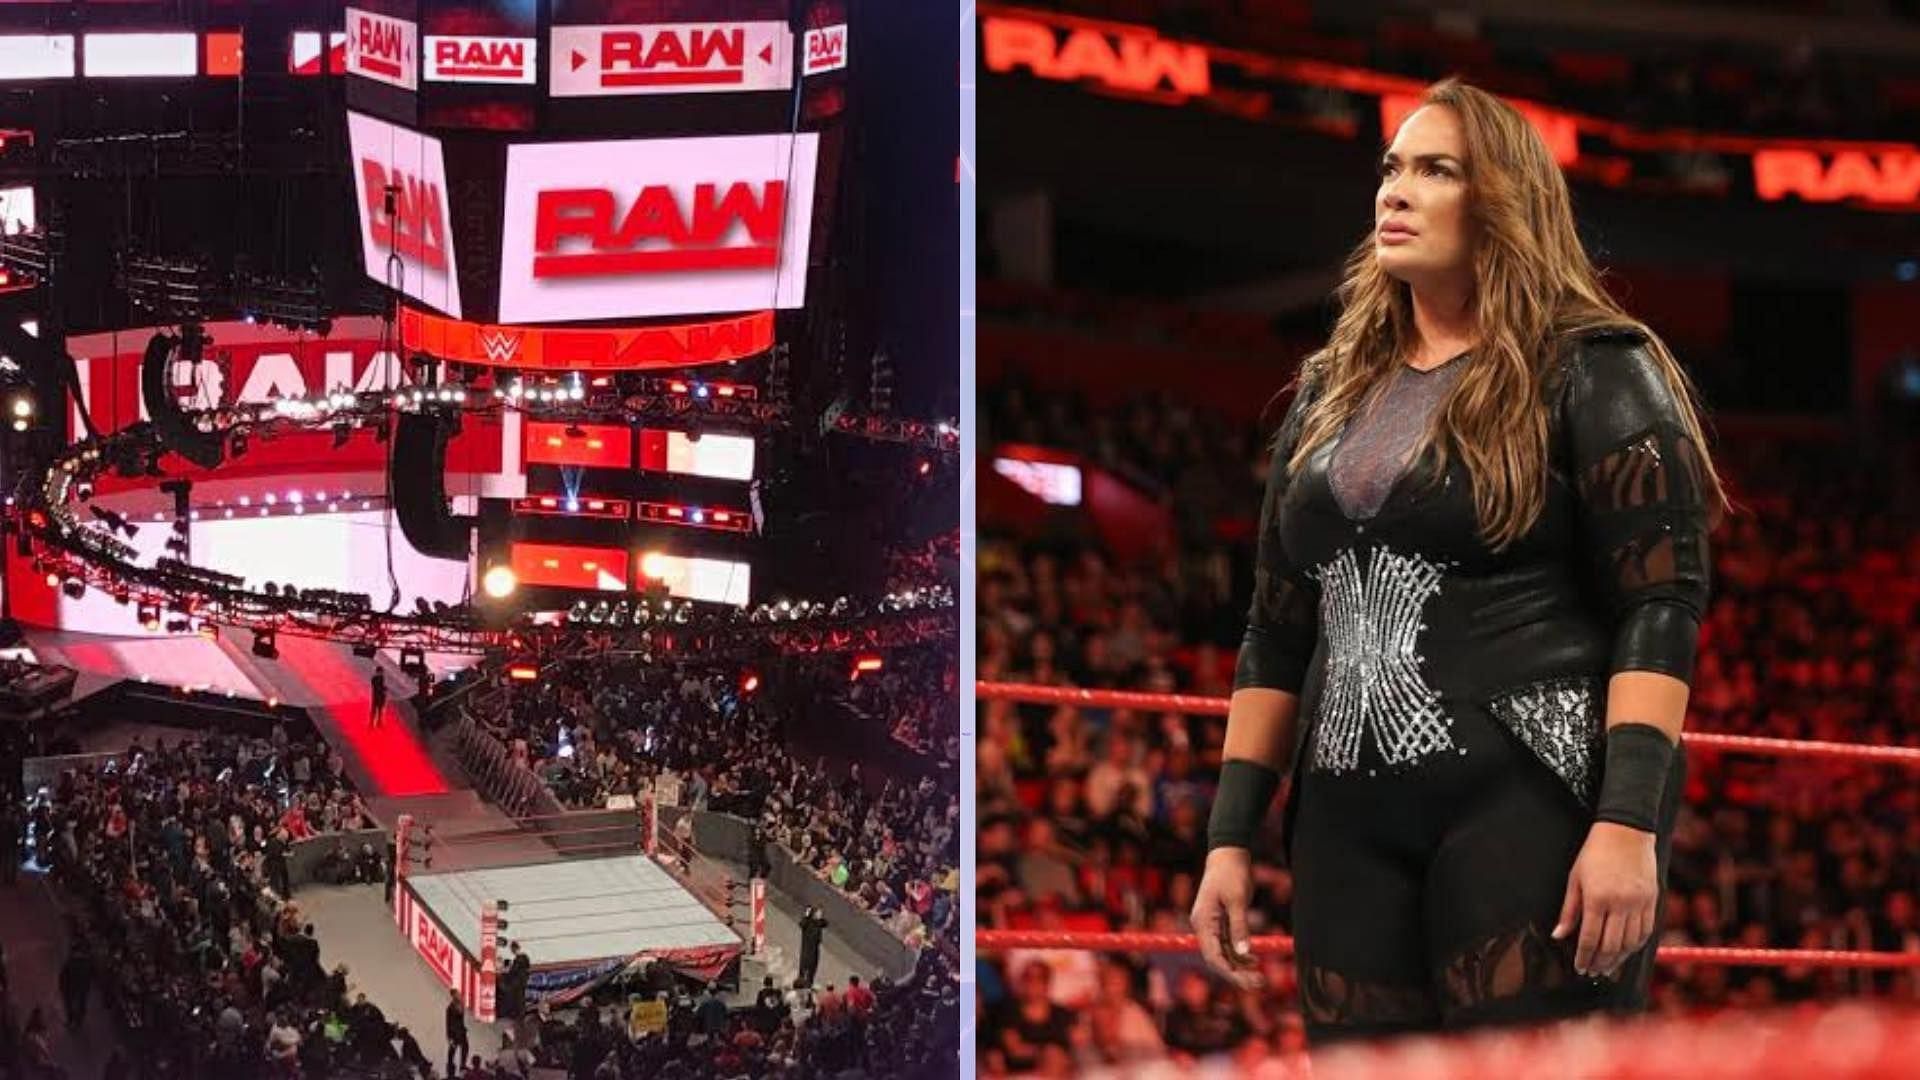 WWE RAW this week was live from the MVP Arena in Albany, New York